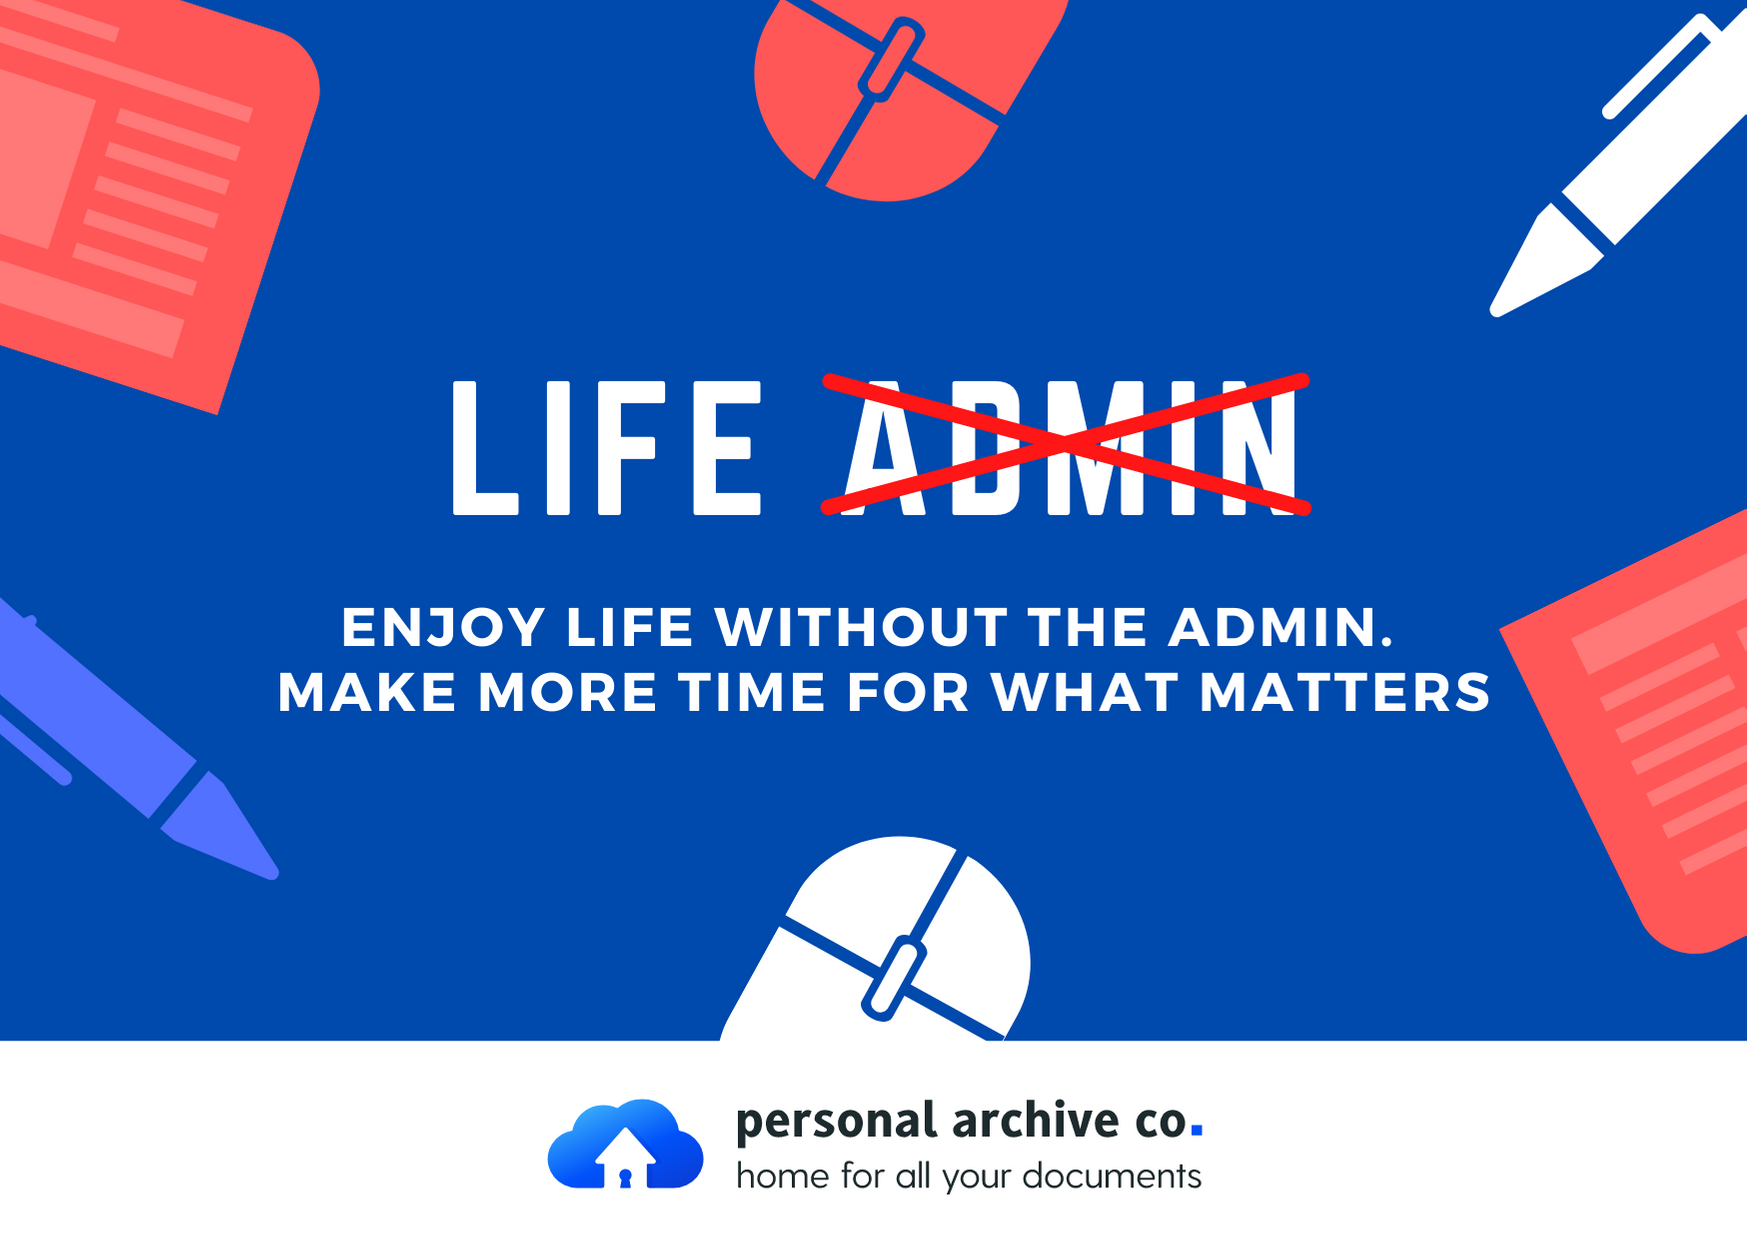 Life admin made simple with cloud storage solution The Personal Archive Co